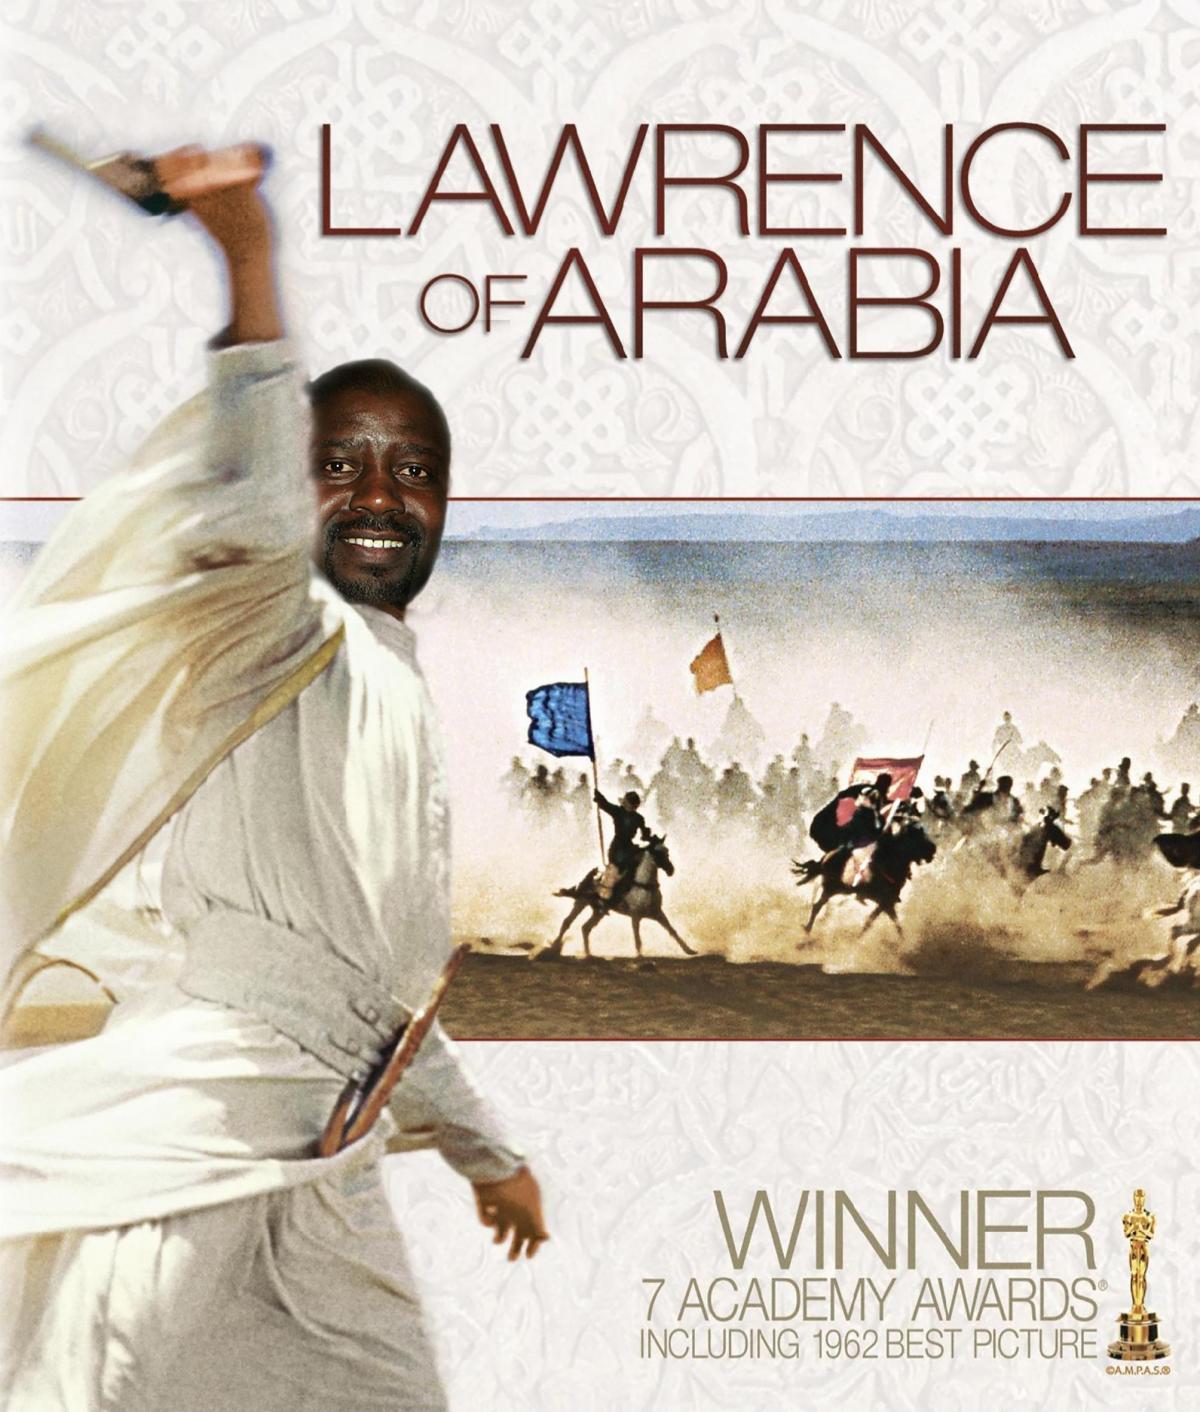 George Lawrence - Lawrence of Arabia